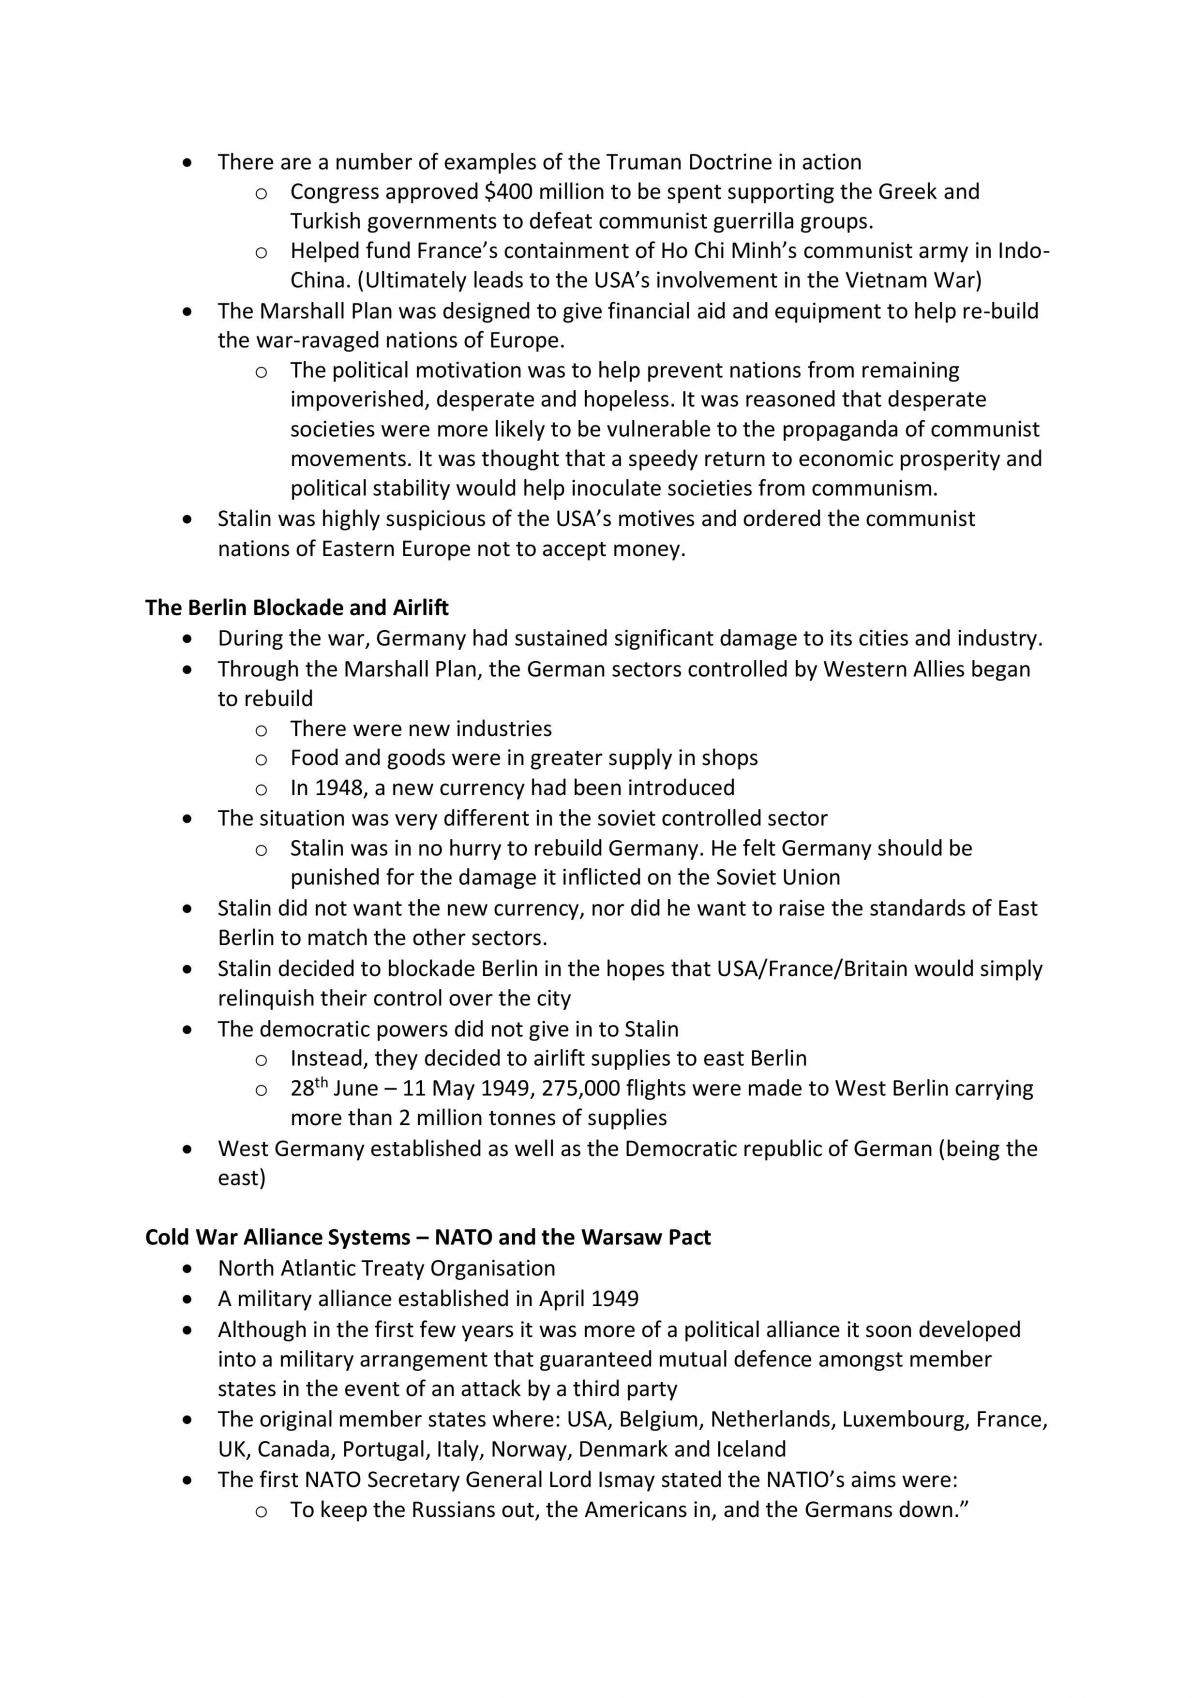 History Course Notes | Modern History - Year 12 SACE | Thinkswap